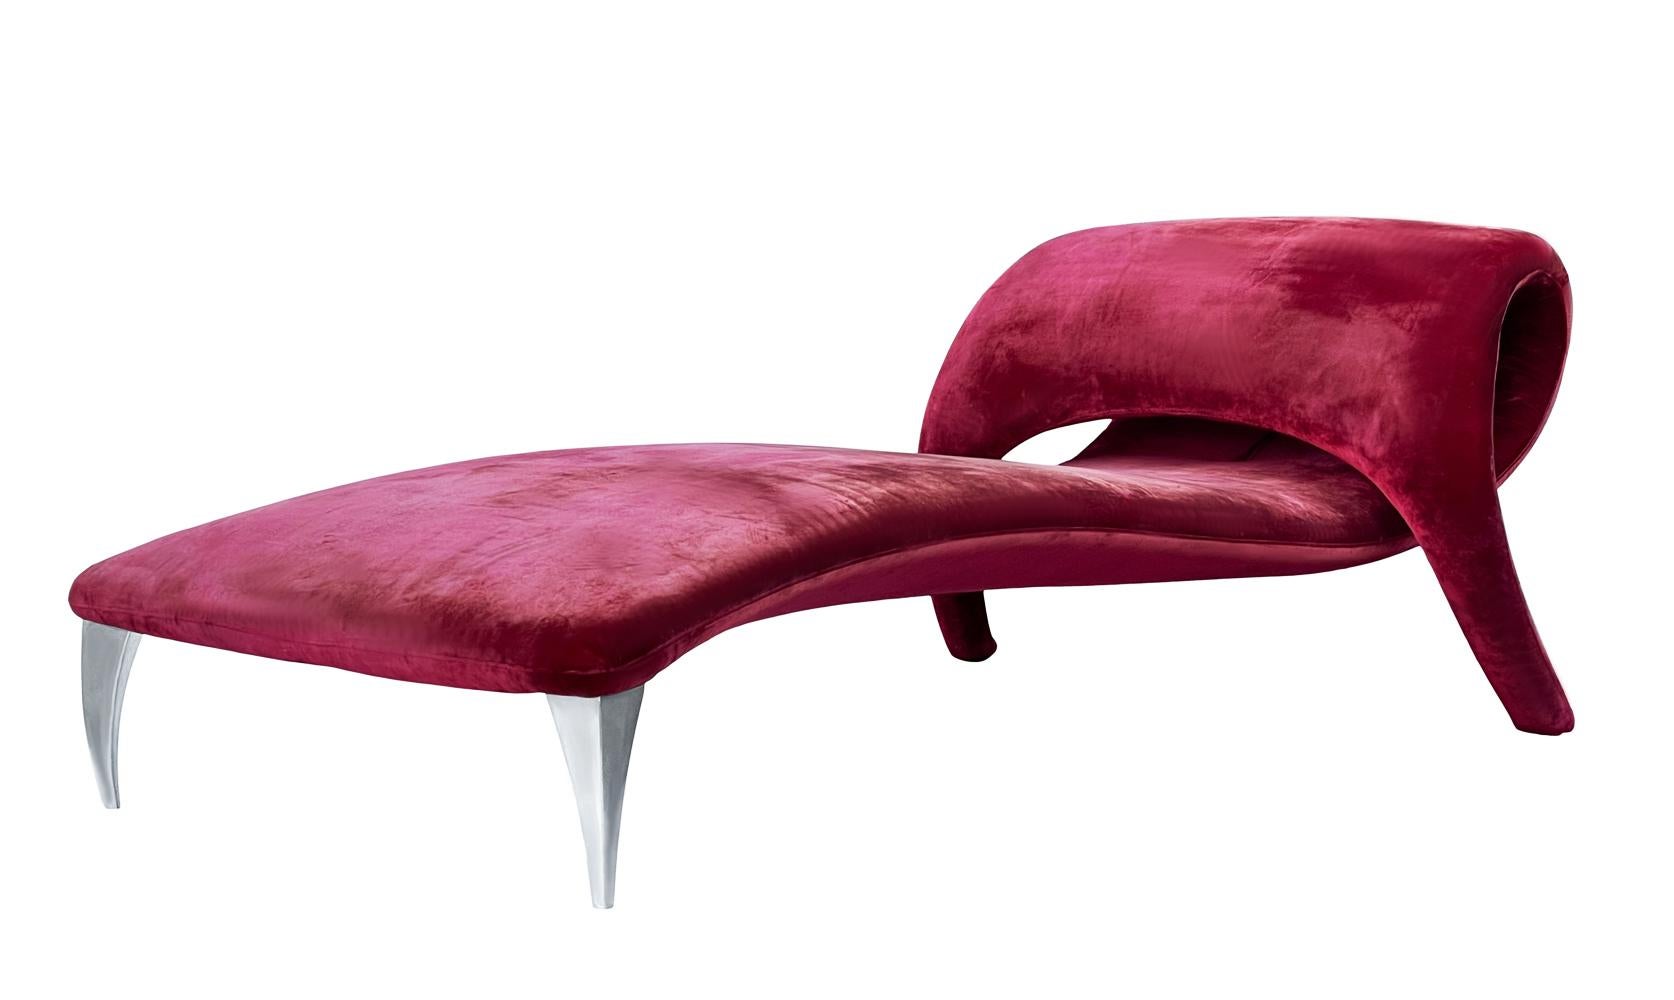 An incredible designed and constructed chaise lounge from Italy circa 1990's. It features a heavy steel internal frame, red velvet upholstery and polished stainless legs. Fabric is original and tired looking, so reupholstery is recommended.